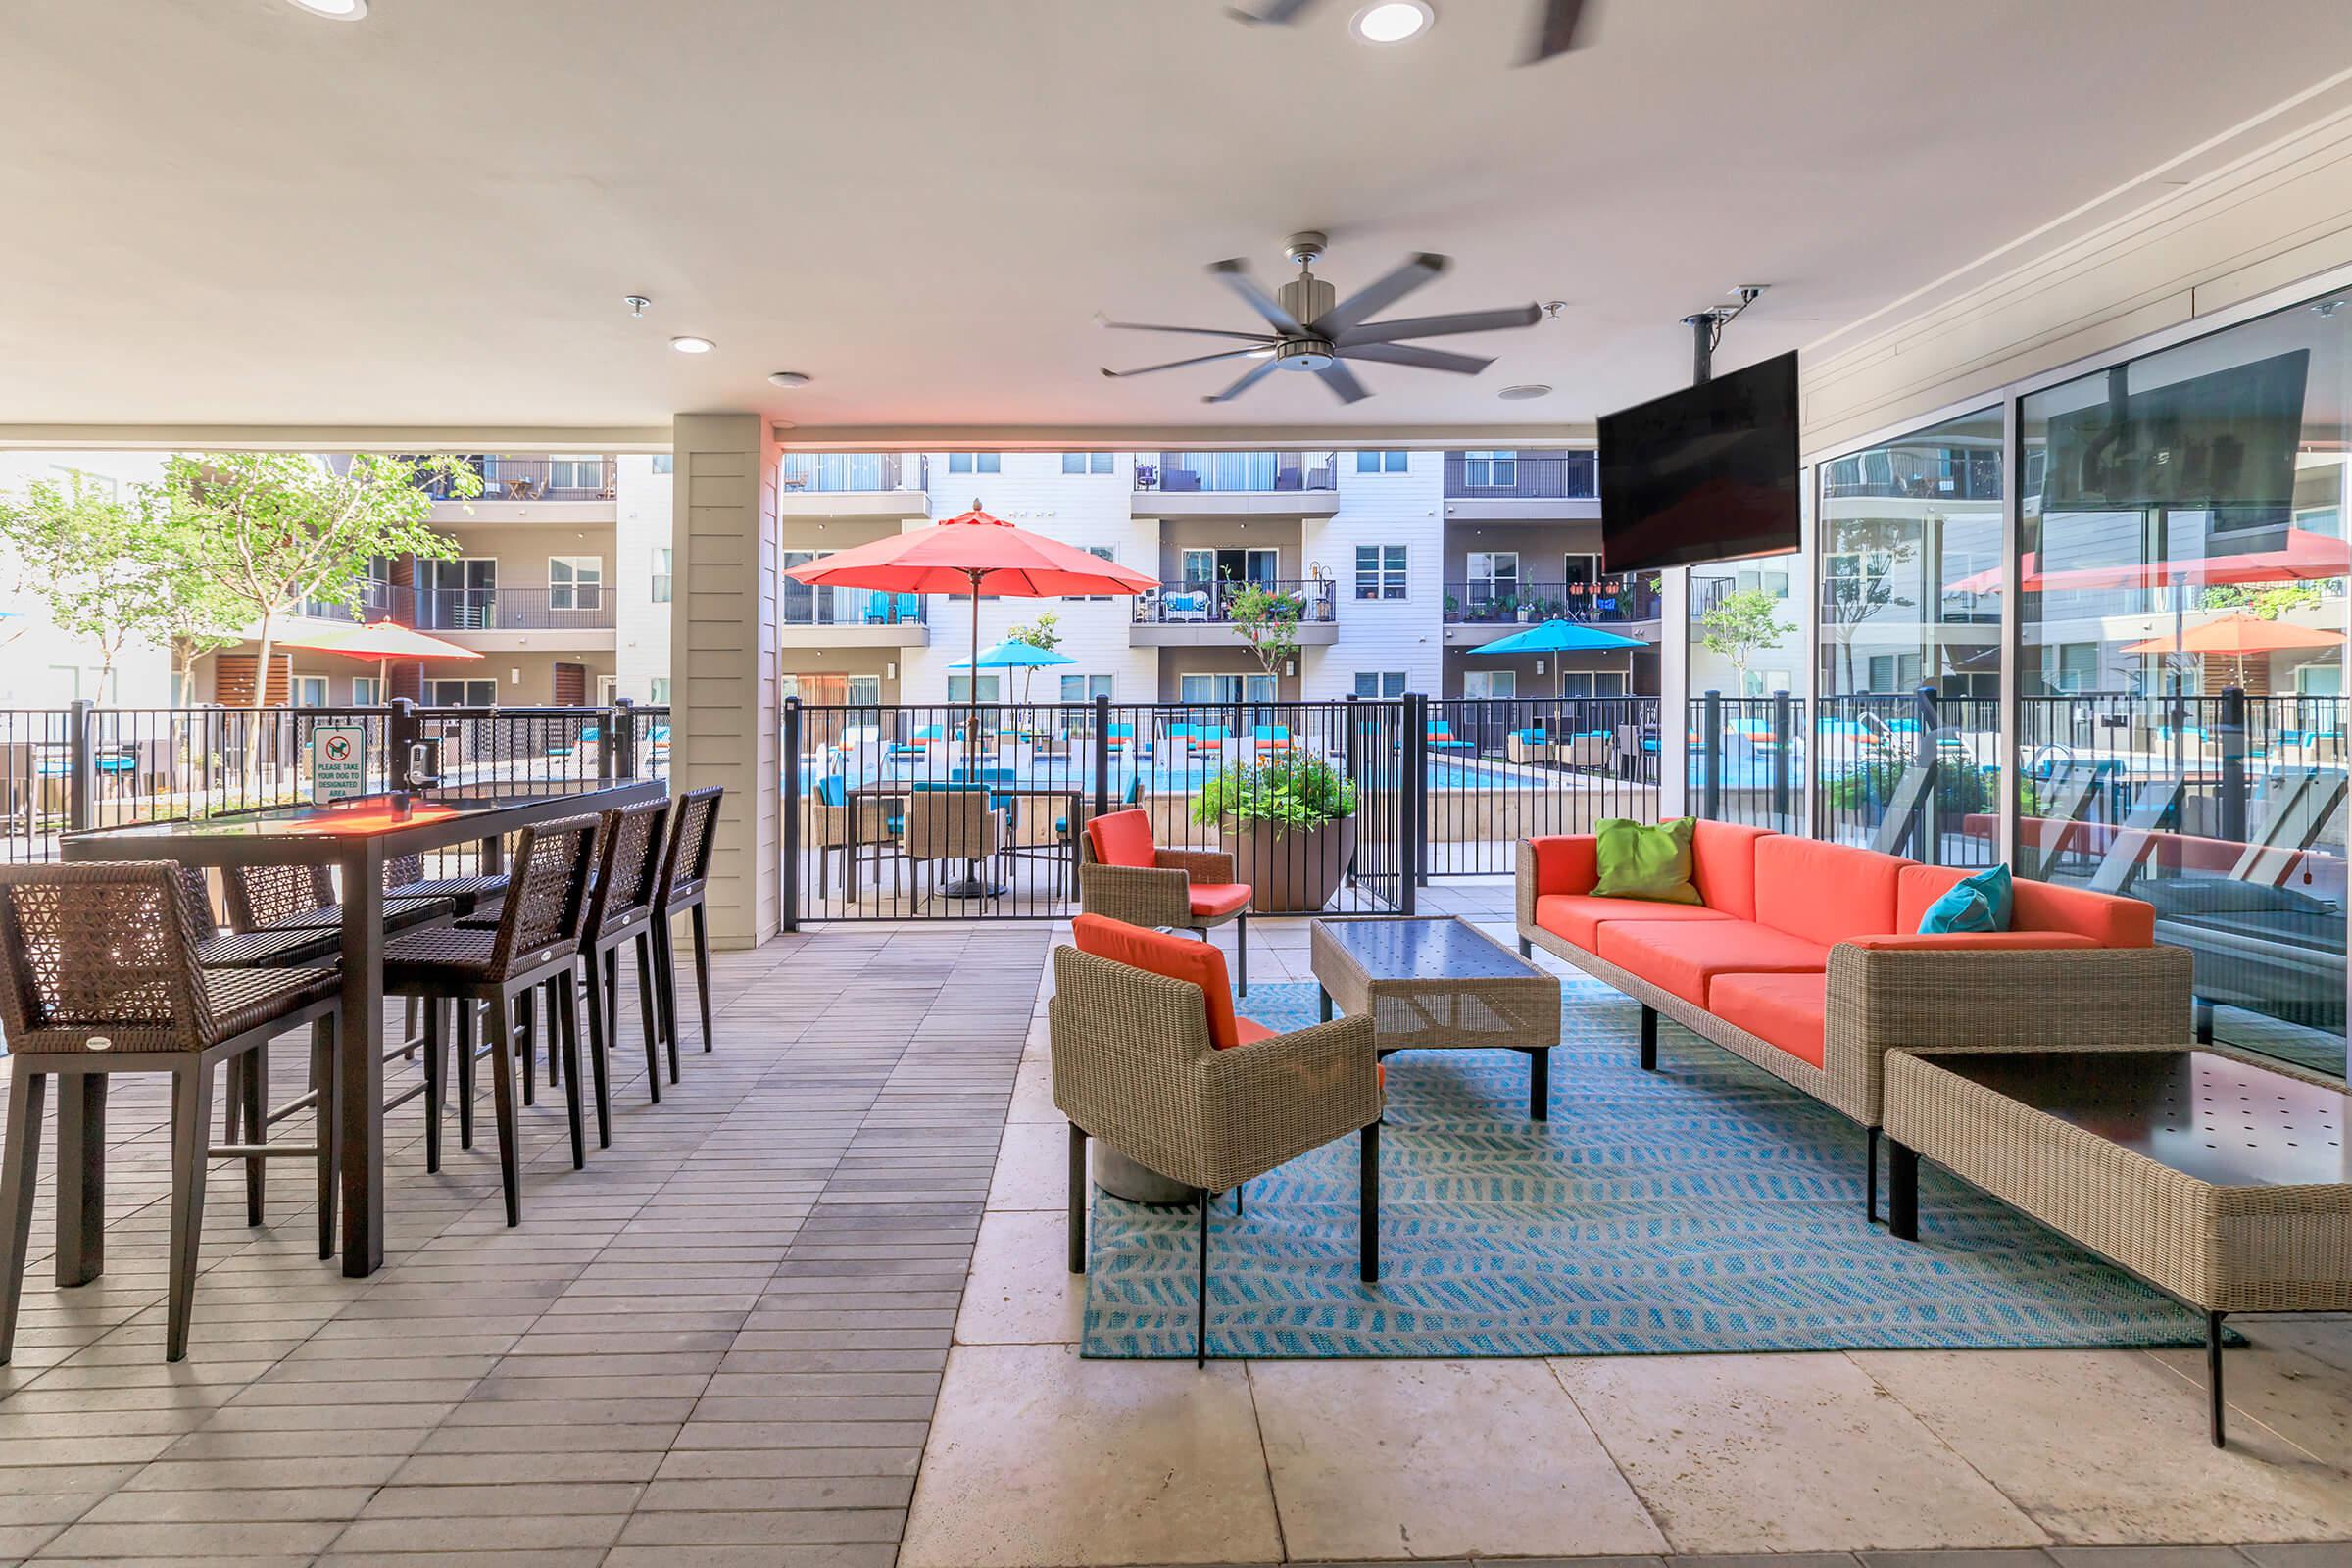 community patio with red chairs